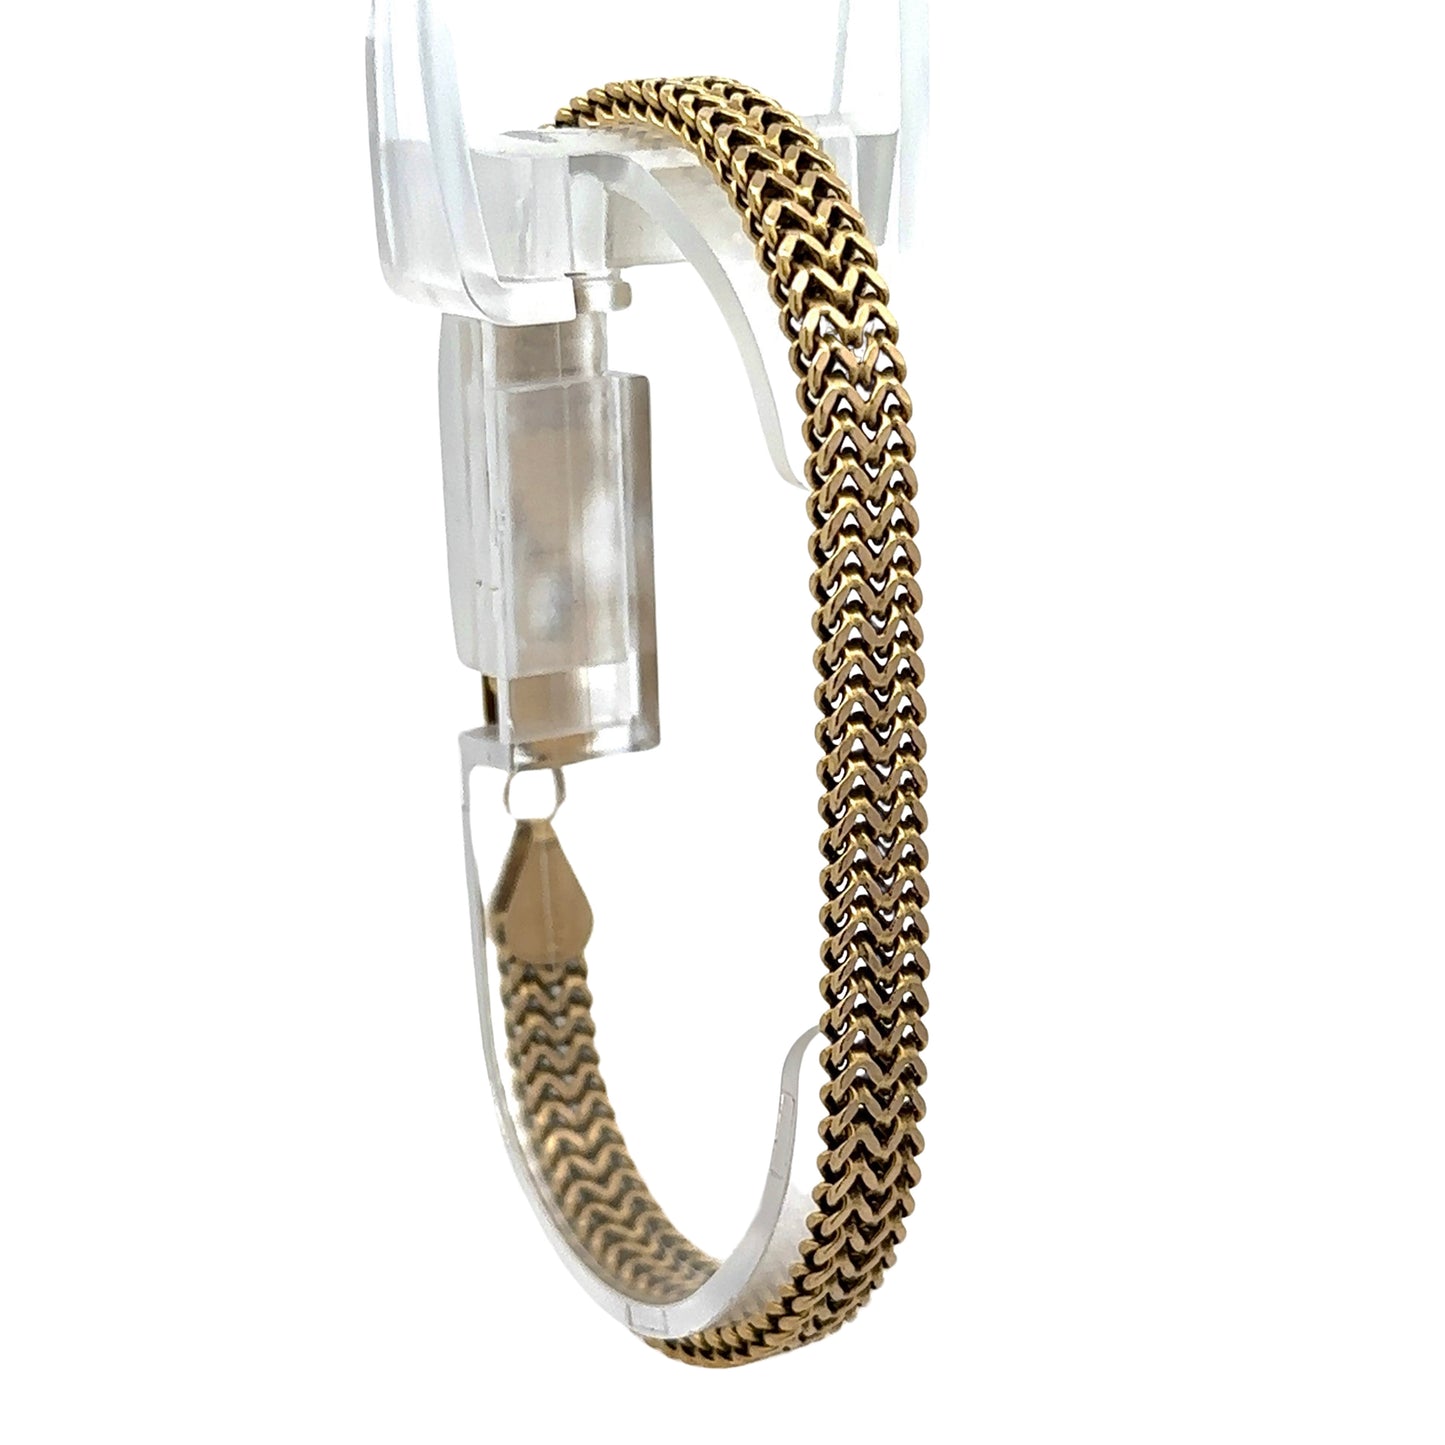 Diagonal view of a doubled up franco bracelet in yellow gold